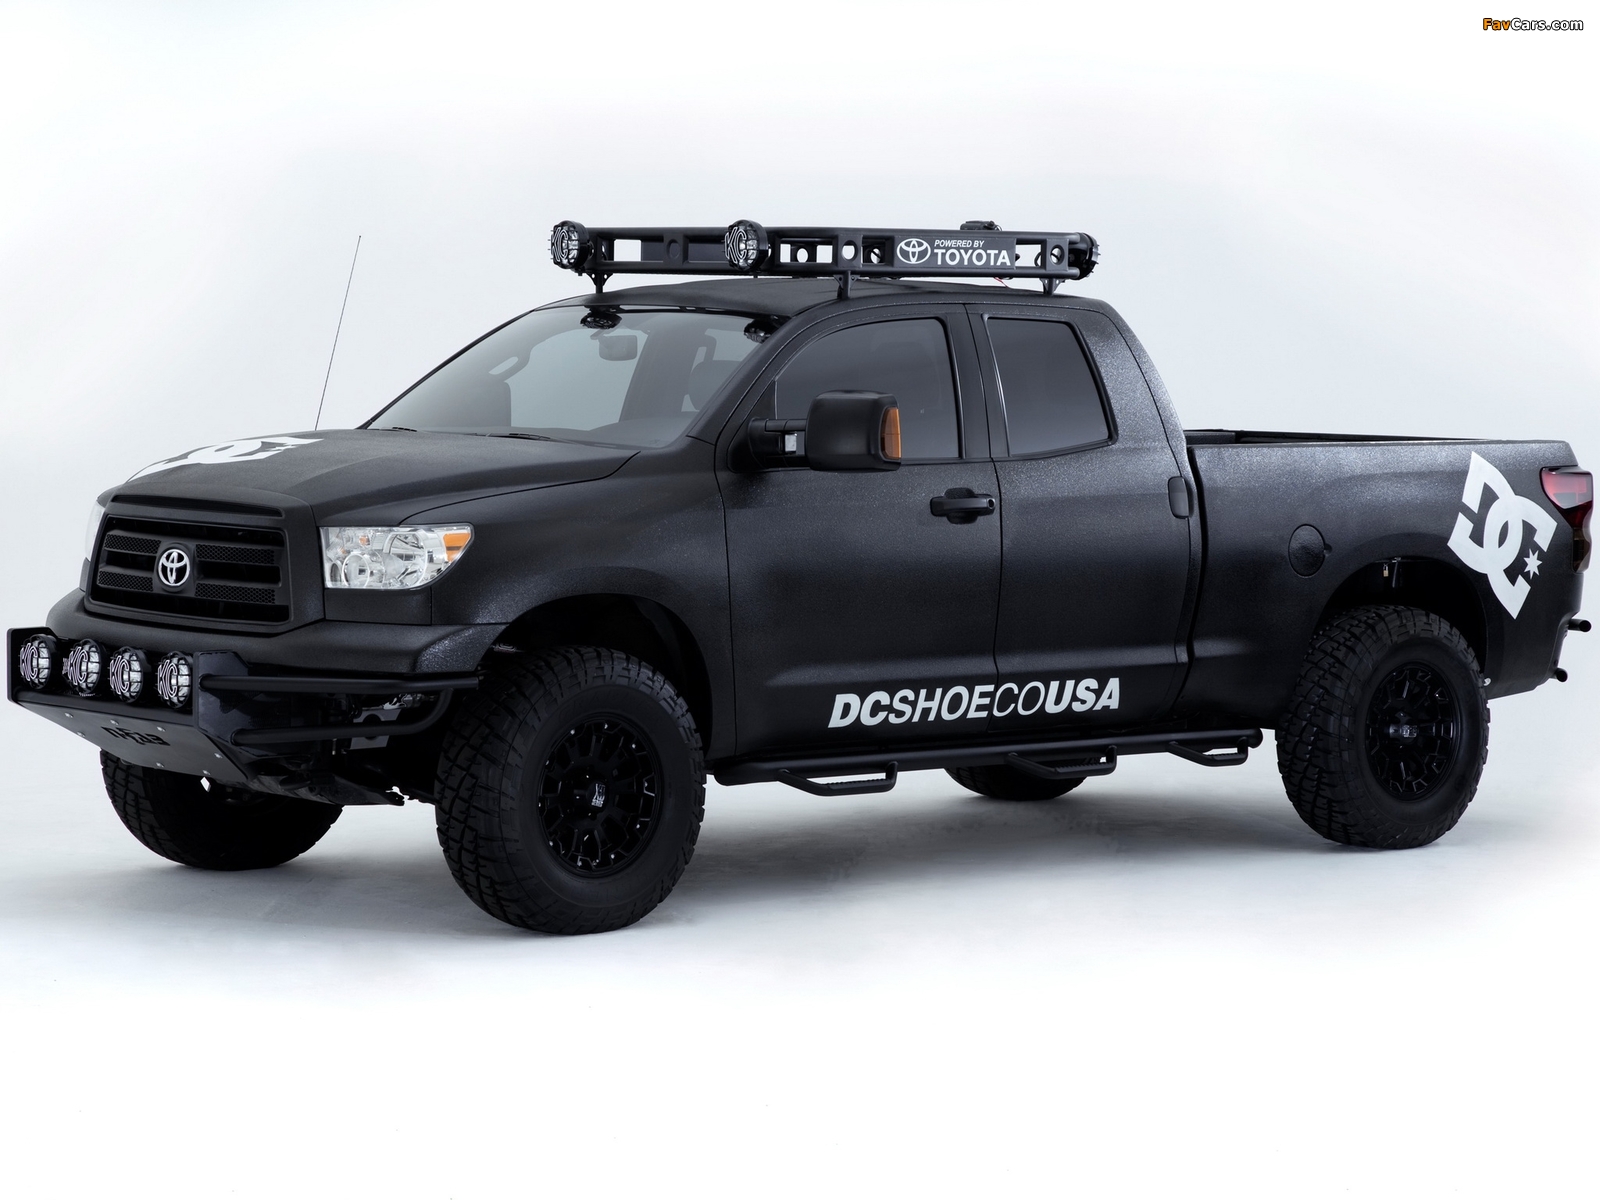 Toyota Ultimate Motocross Tundra Truck 2011 pictures (1600 x 1200)